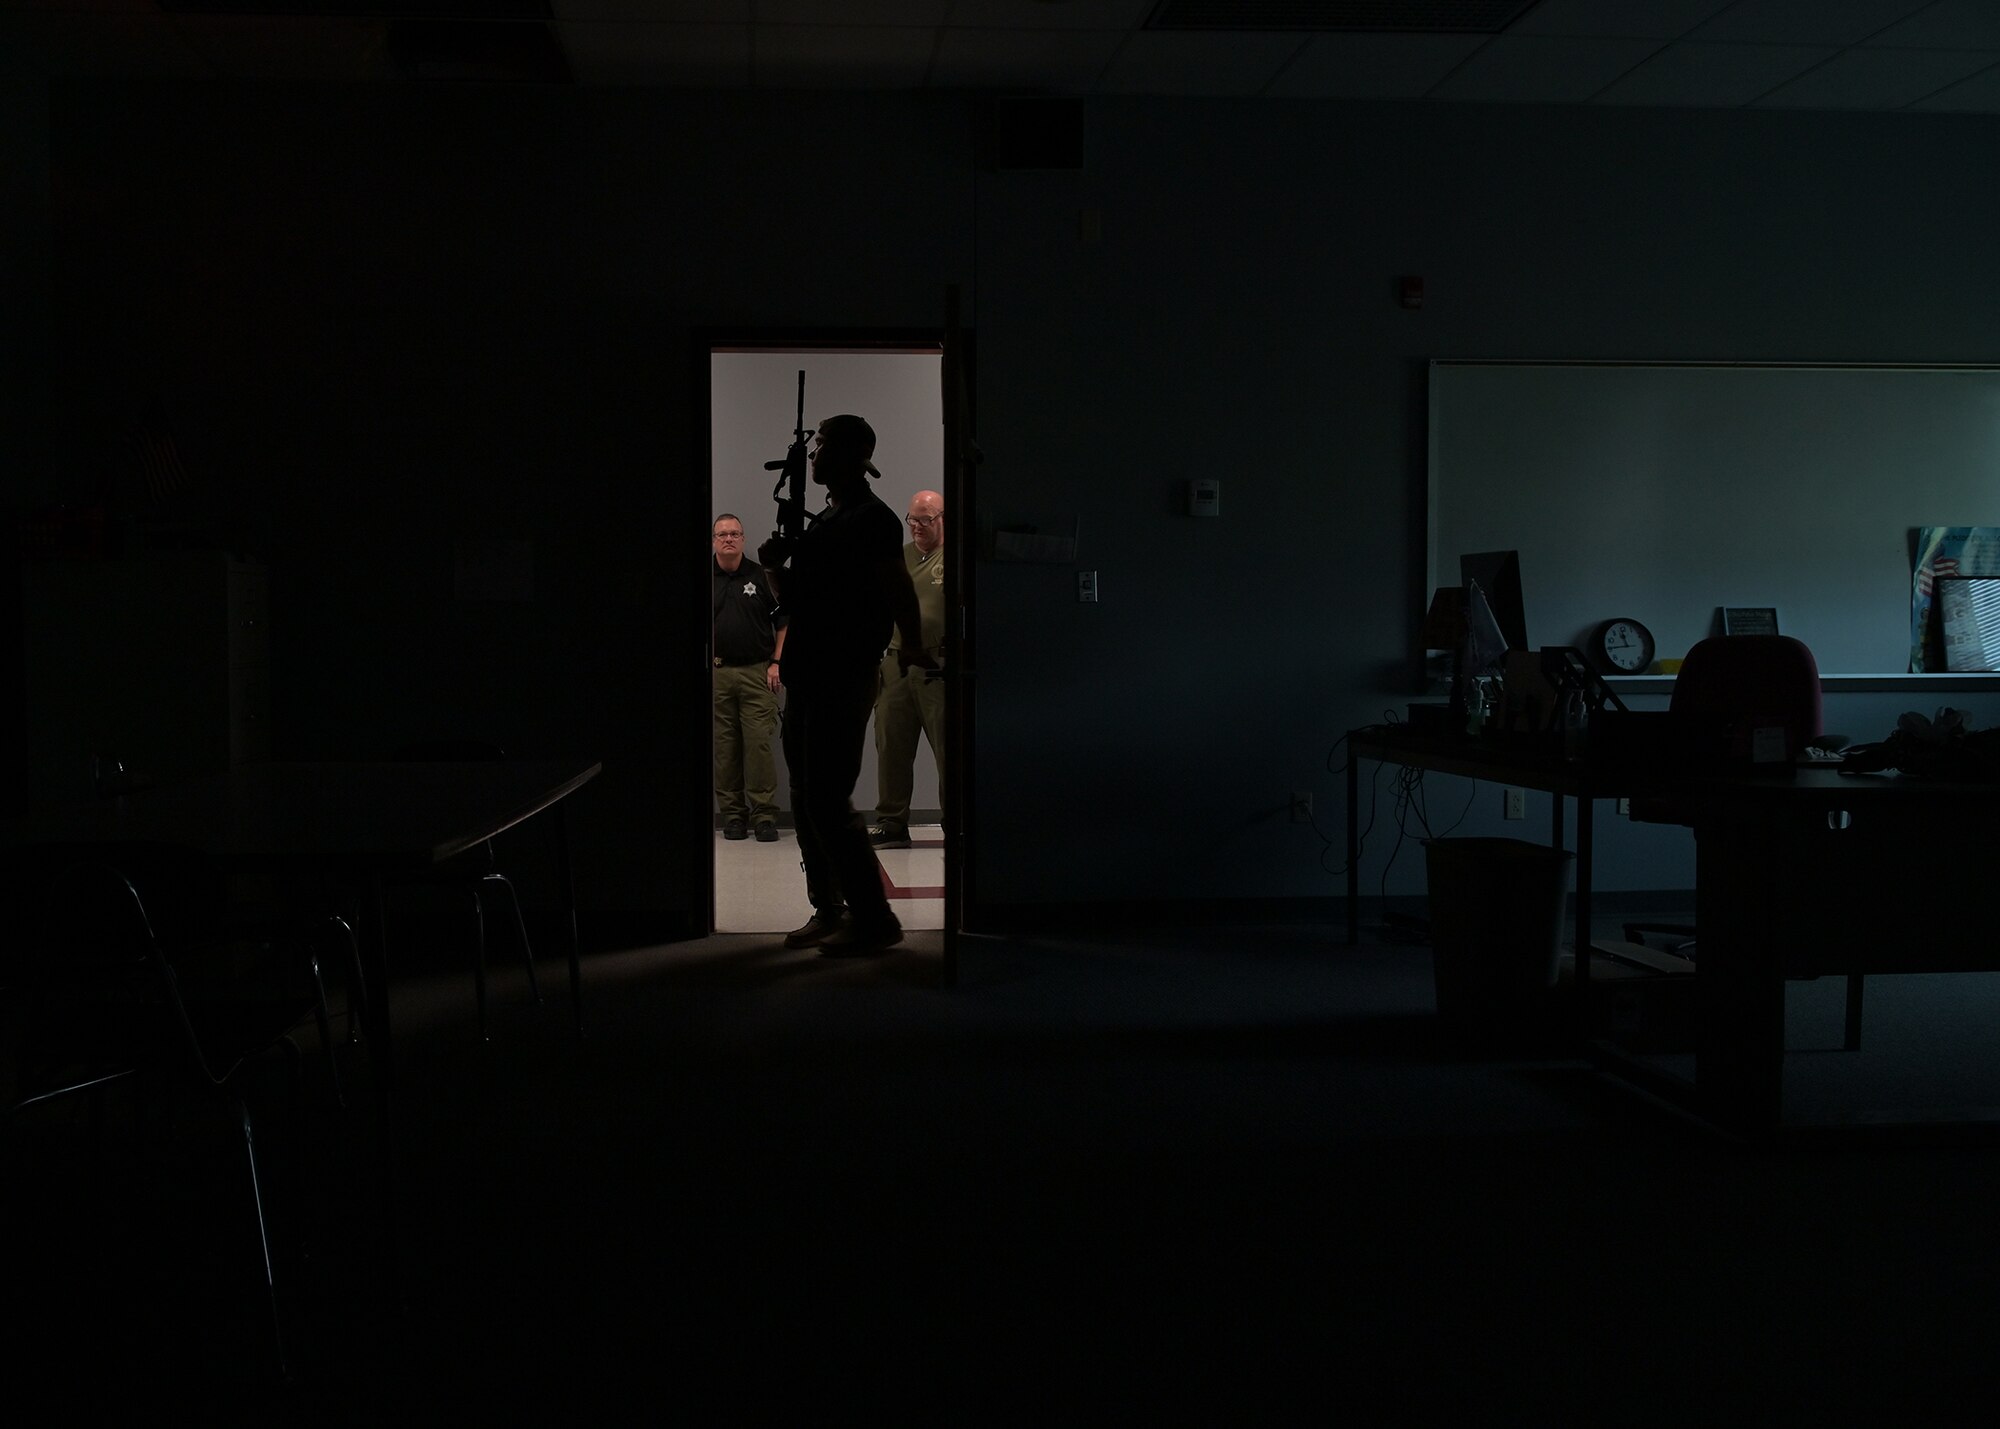 A member of the Monroe County SWAT is silhouetted in a dark room.